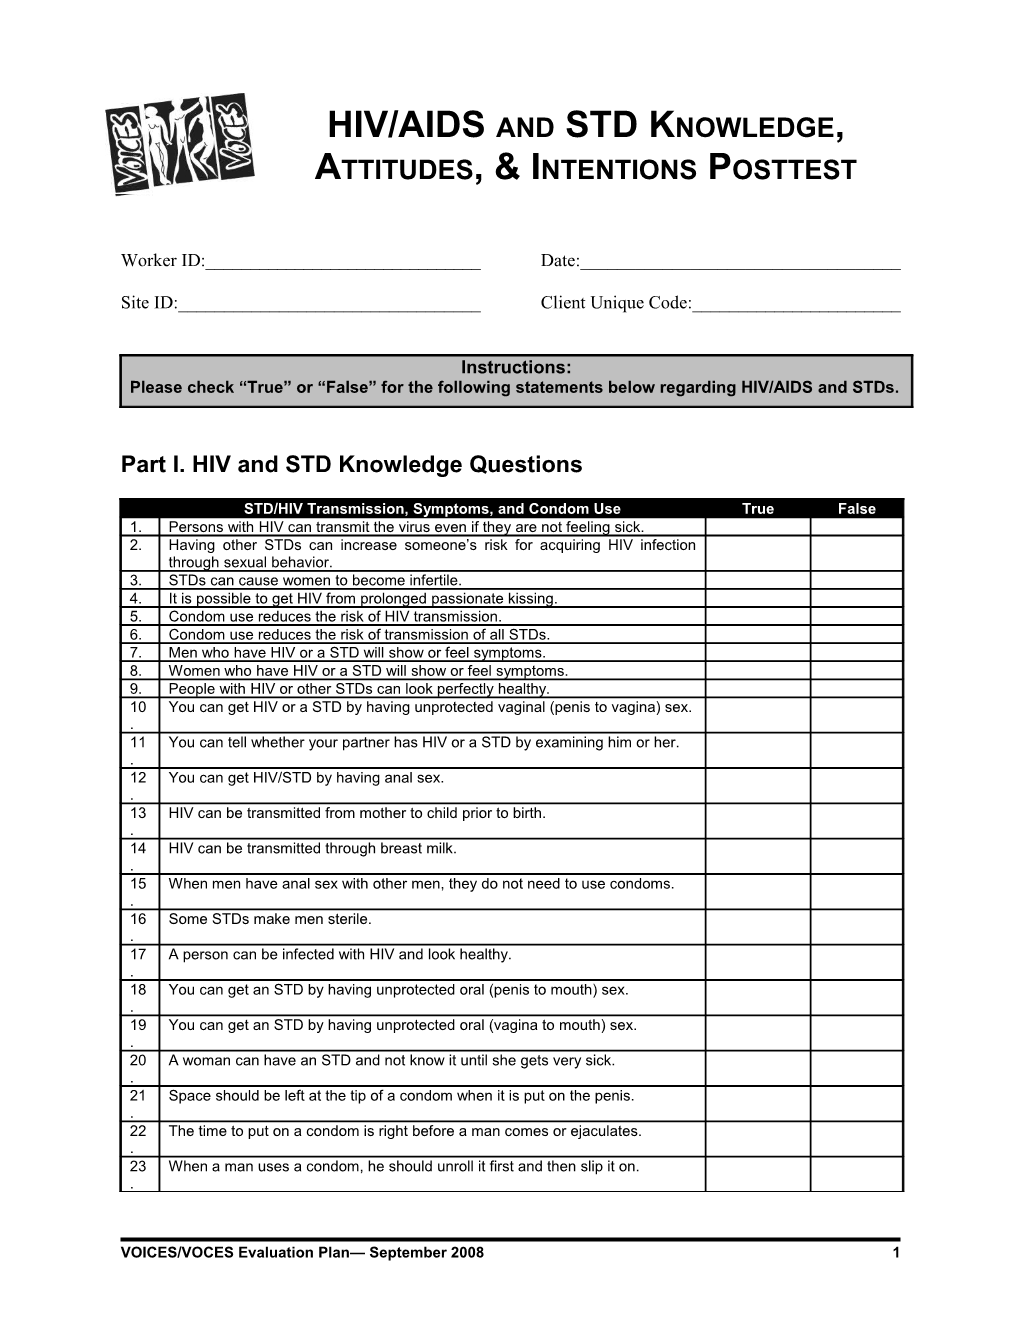 HIV/AIDS and STD Knowledge, Attitudes, & Intentions Posttest